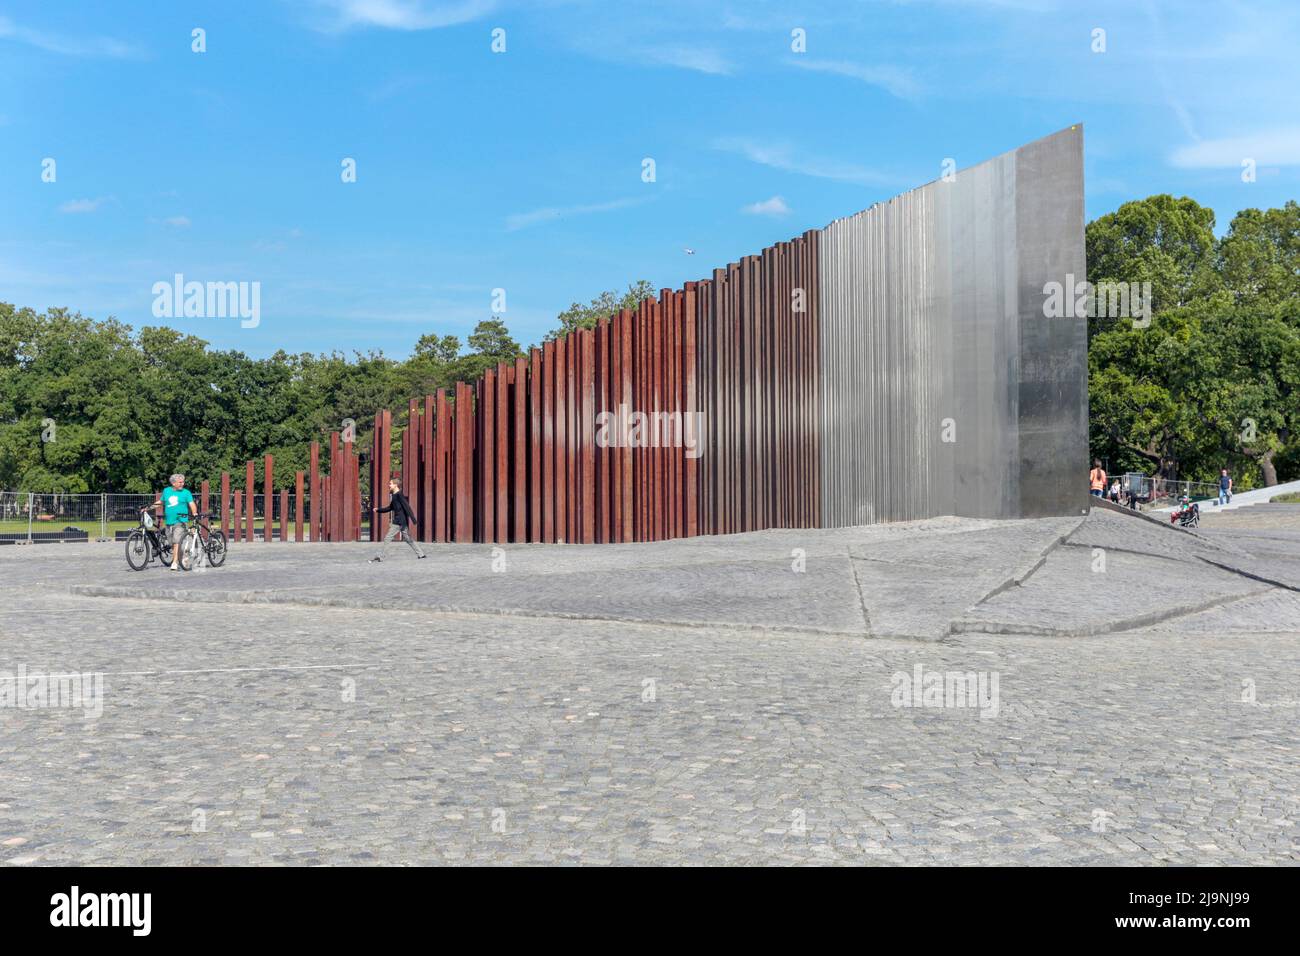 Budapest, Hungary - 05 24 2022: Monument of the 1956 Hungarian Revolution at the Liget city park Stock Photo